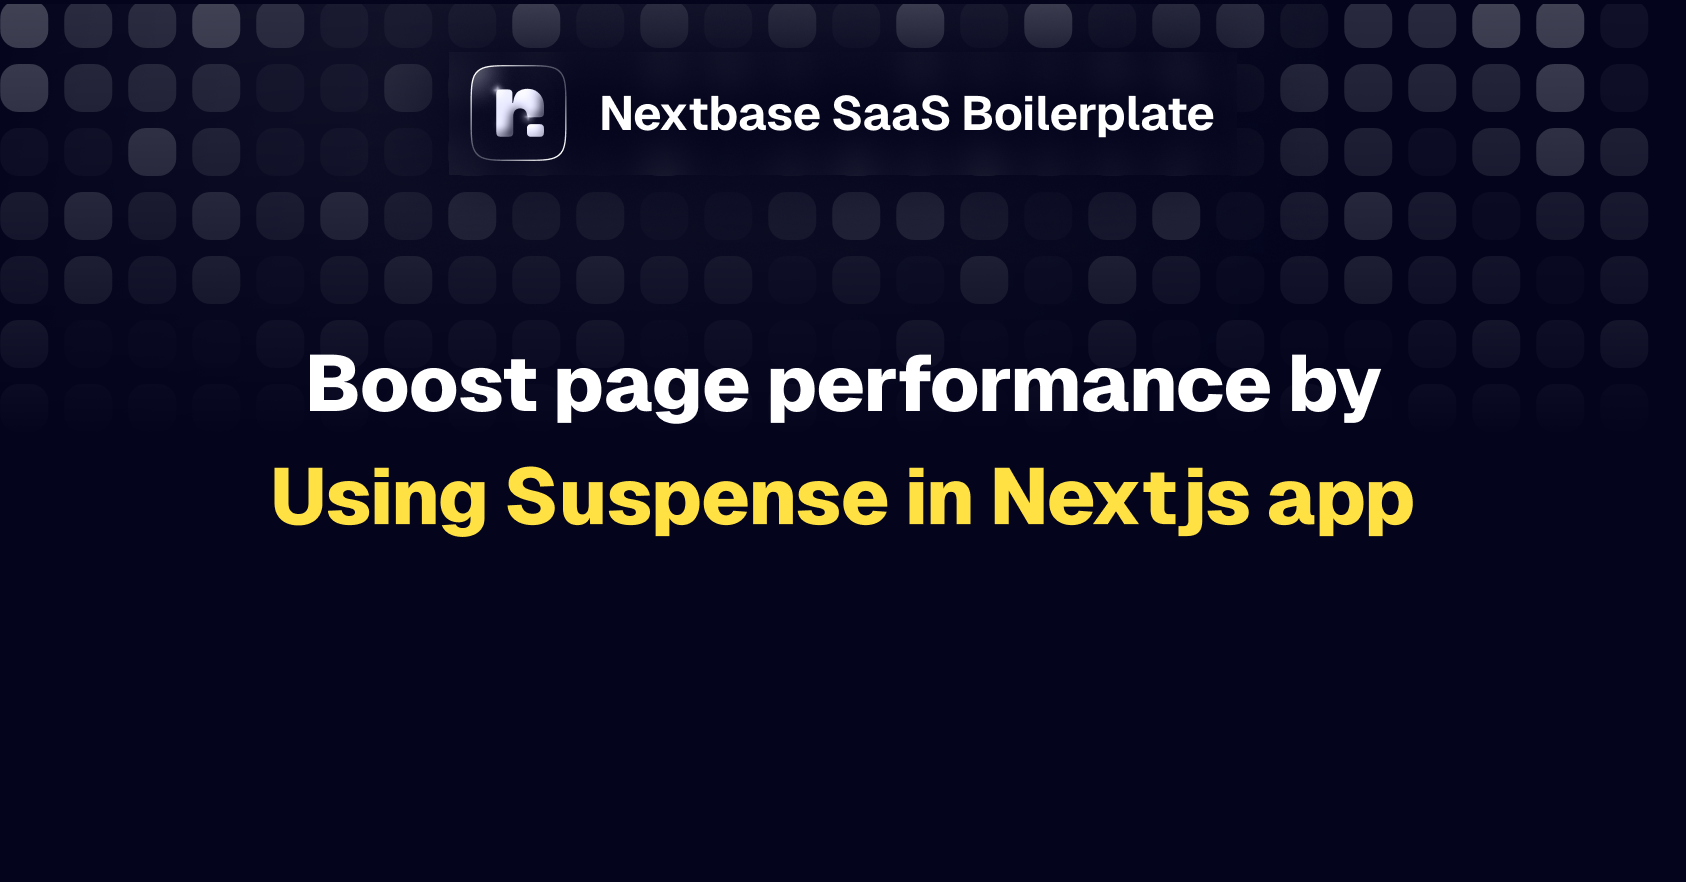 Boost page performance by using Suspense in Nextjs application